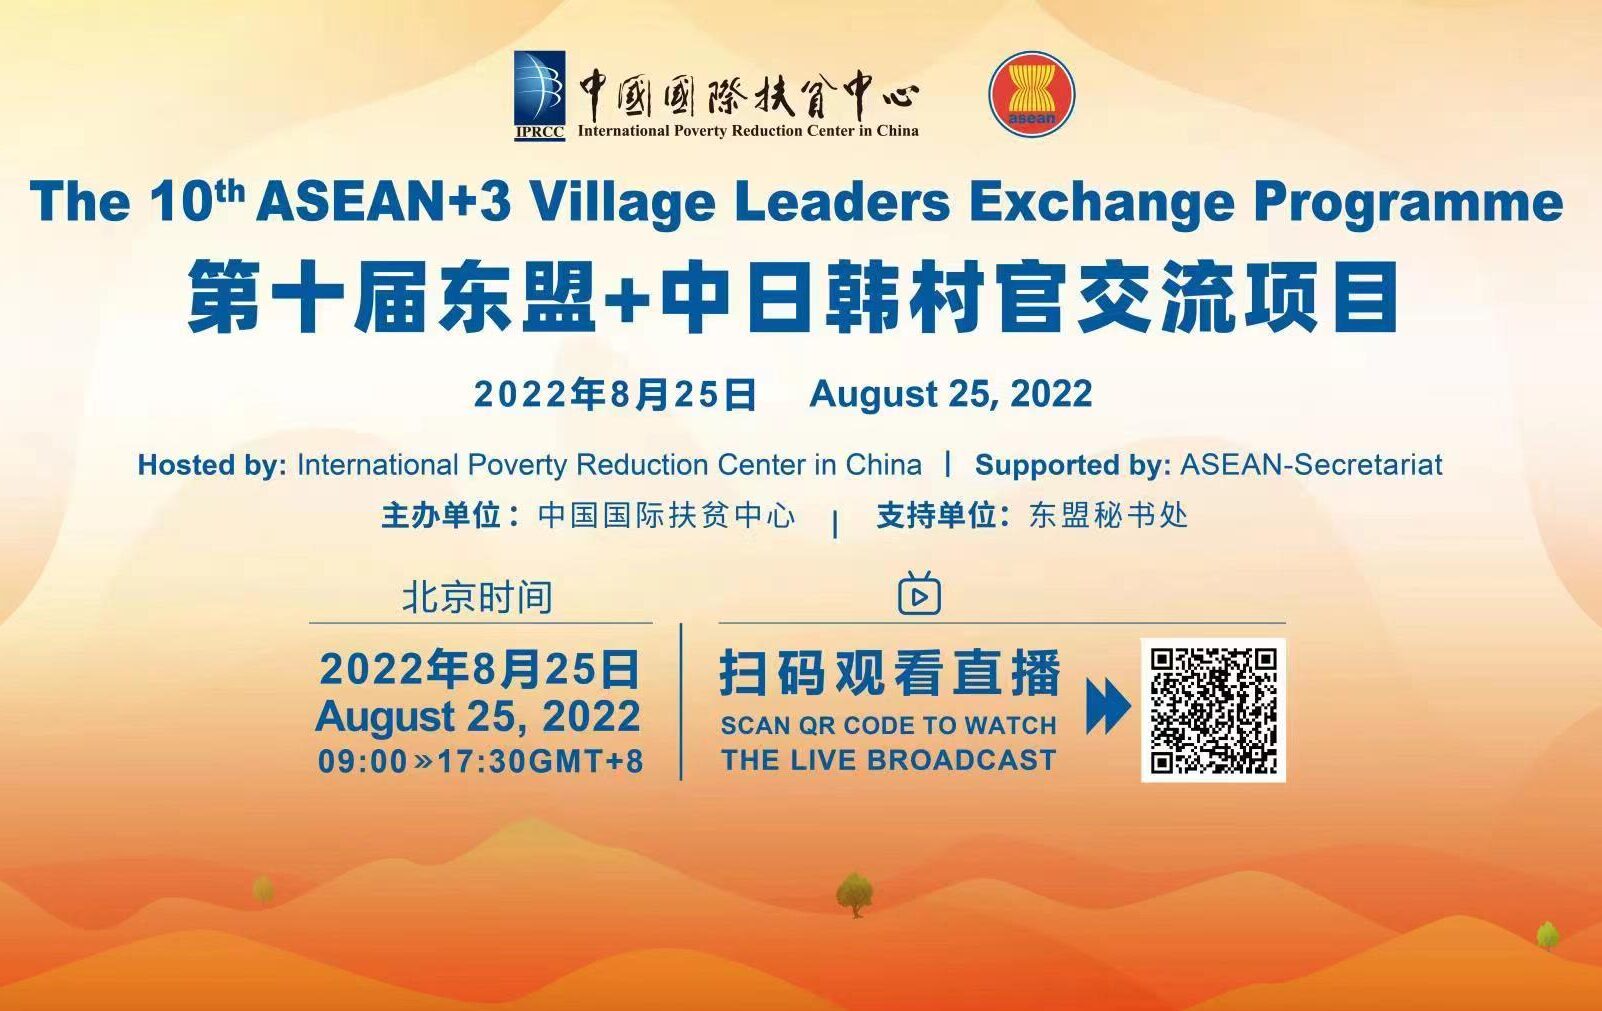 The 10th ASEAN+3 Village Leaders Exchange Programme